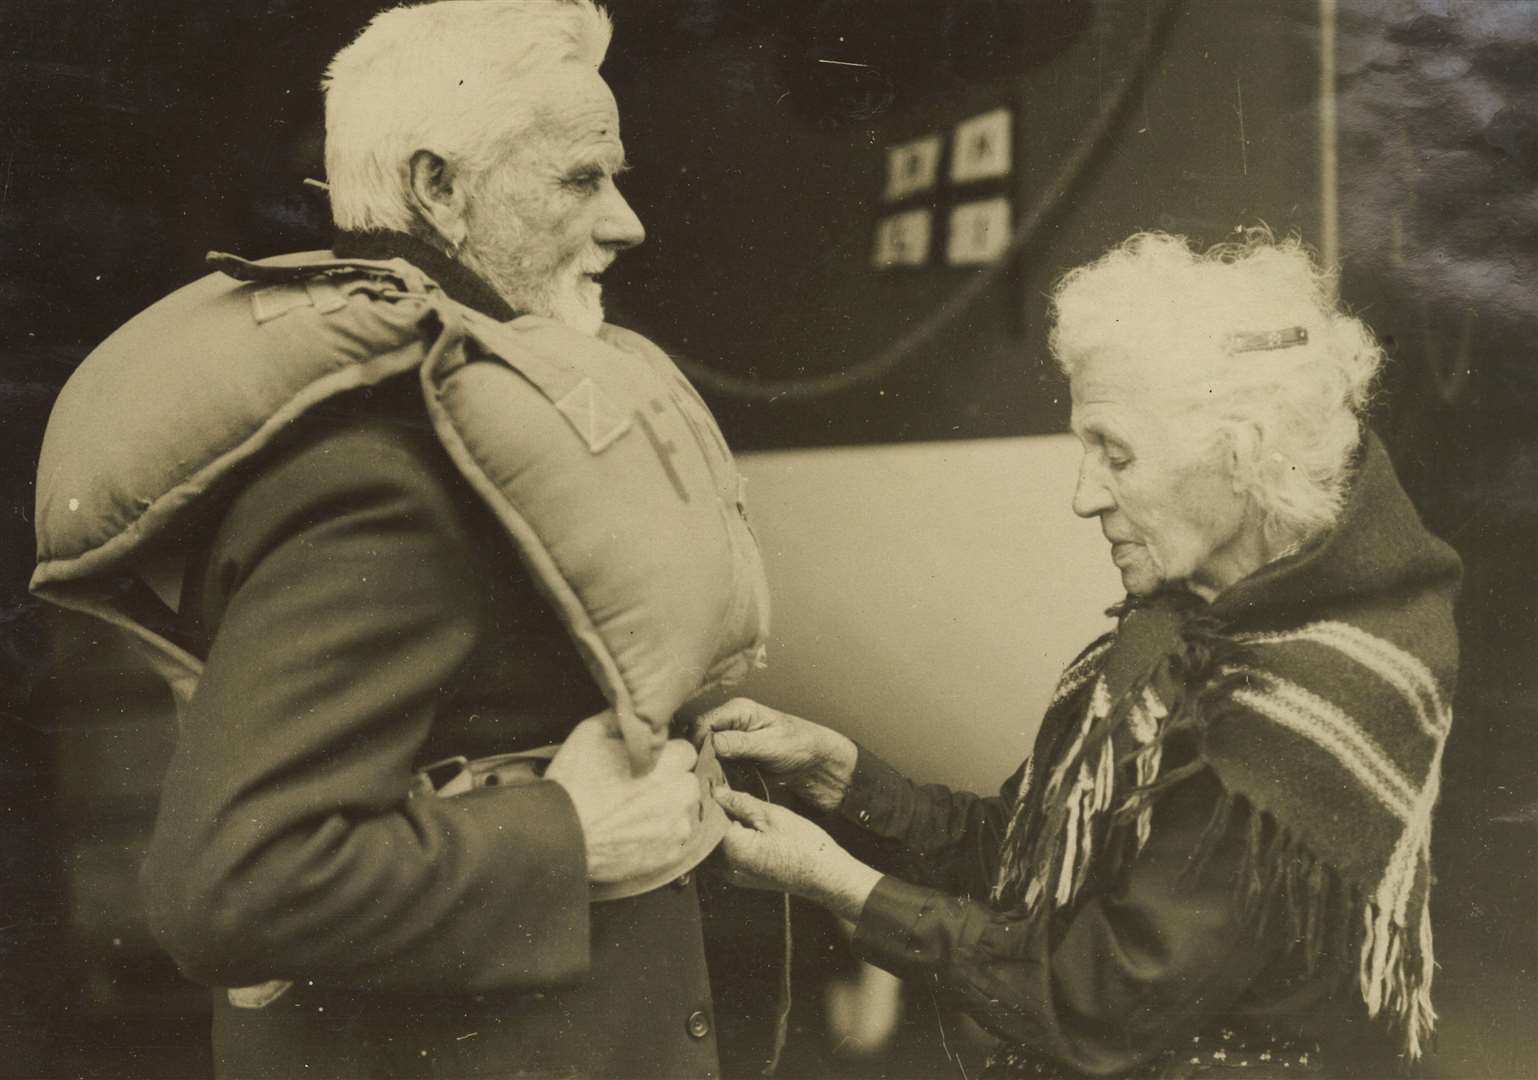 Coxswain William Brown gets his lifejacket fastened during 50-years of service on Cresswell Lifeboat from 1875, where by the age of 70 he’d rescued nearly 100 people - earning him a Certificate of Service on retirement and his wife a gold brooch for her services as a launcher and fundraiser. Image: RNLI.